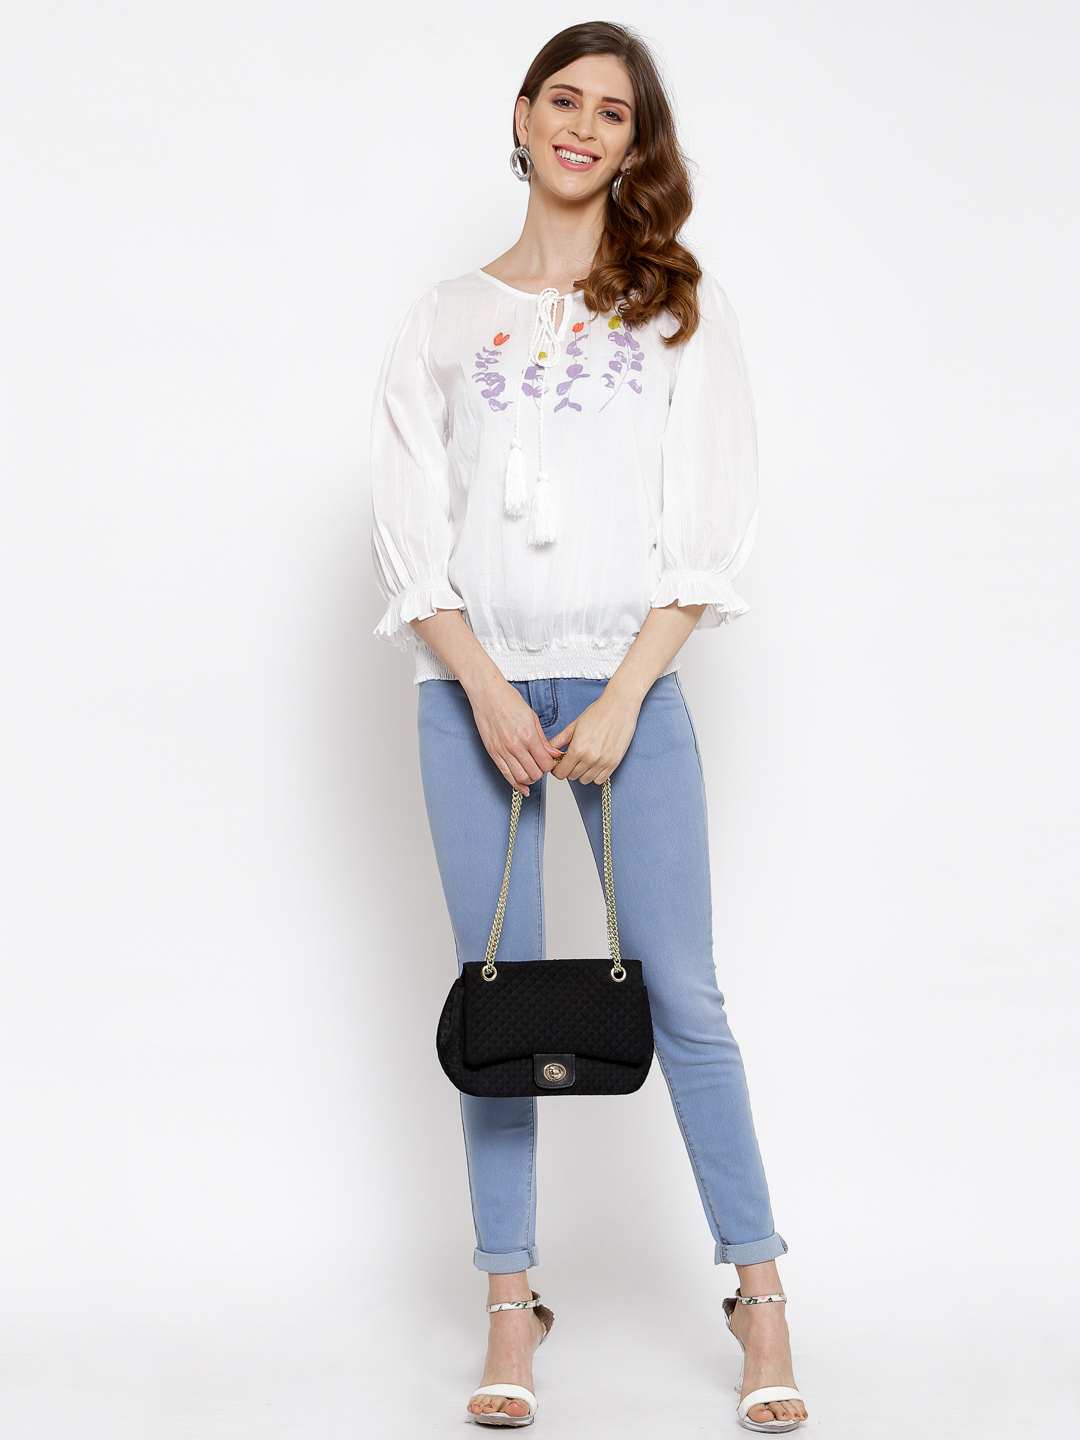 Placement Printed Top